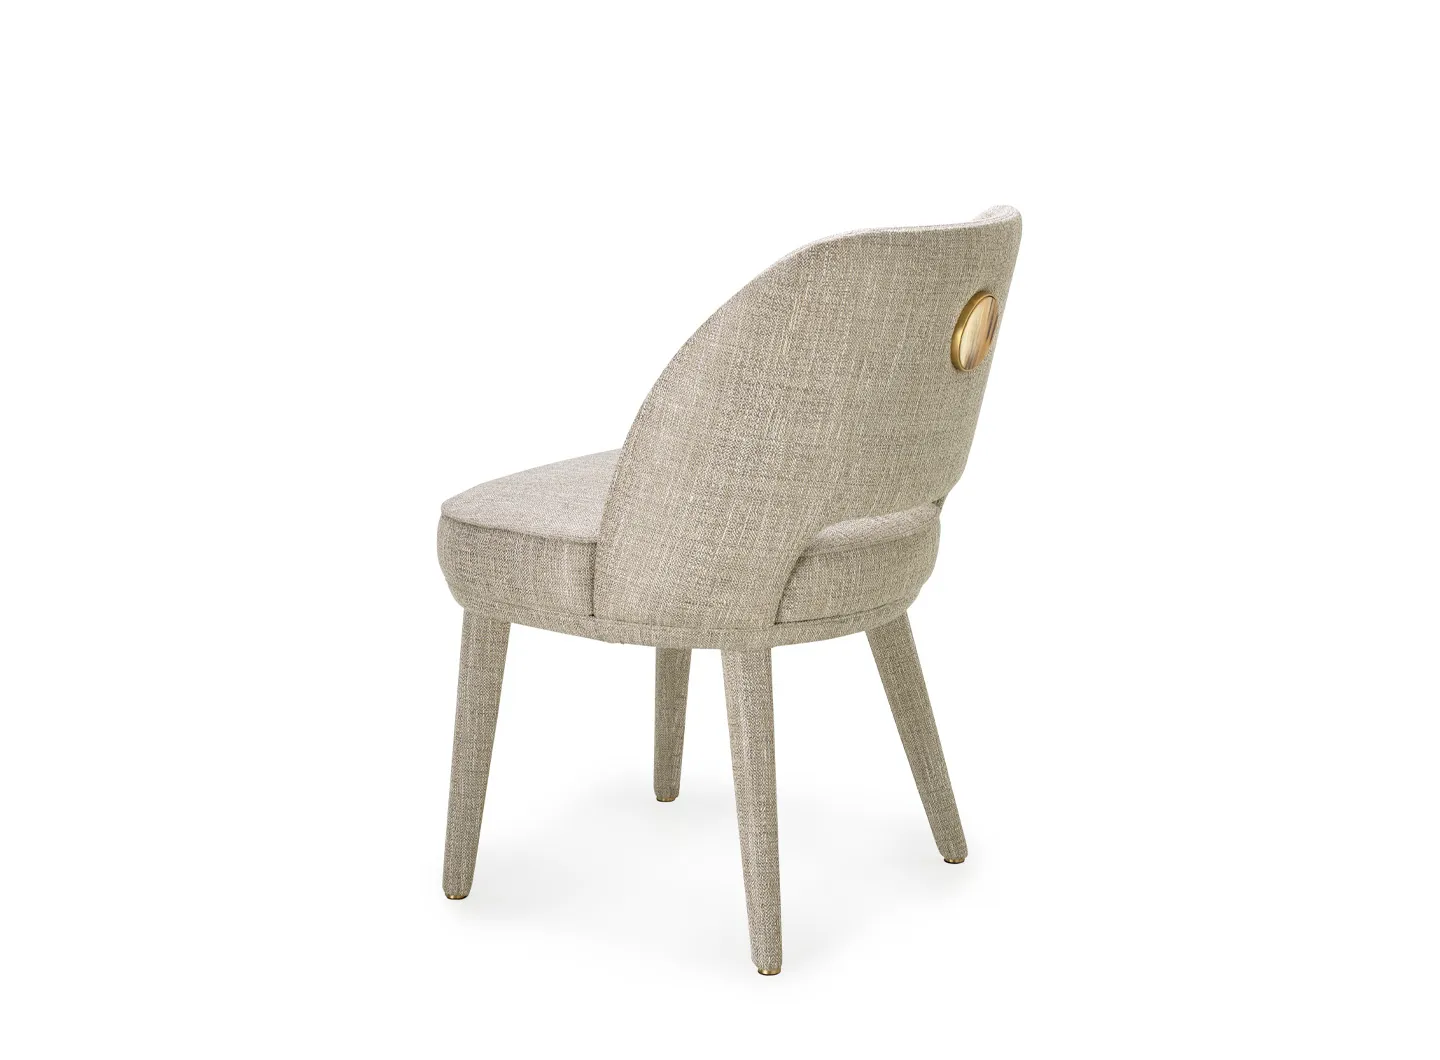 Arcahorn - Penelope Chair in Fabric